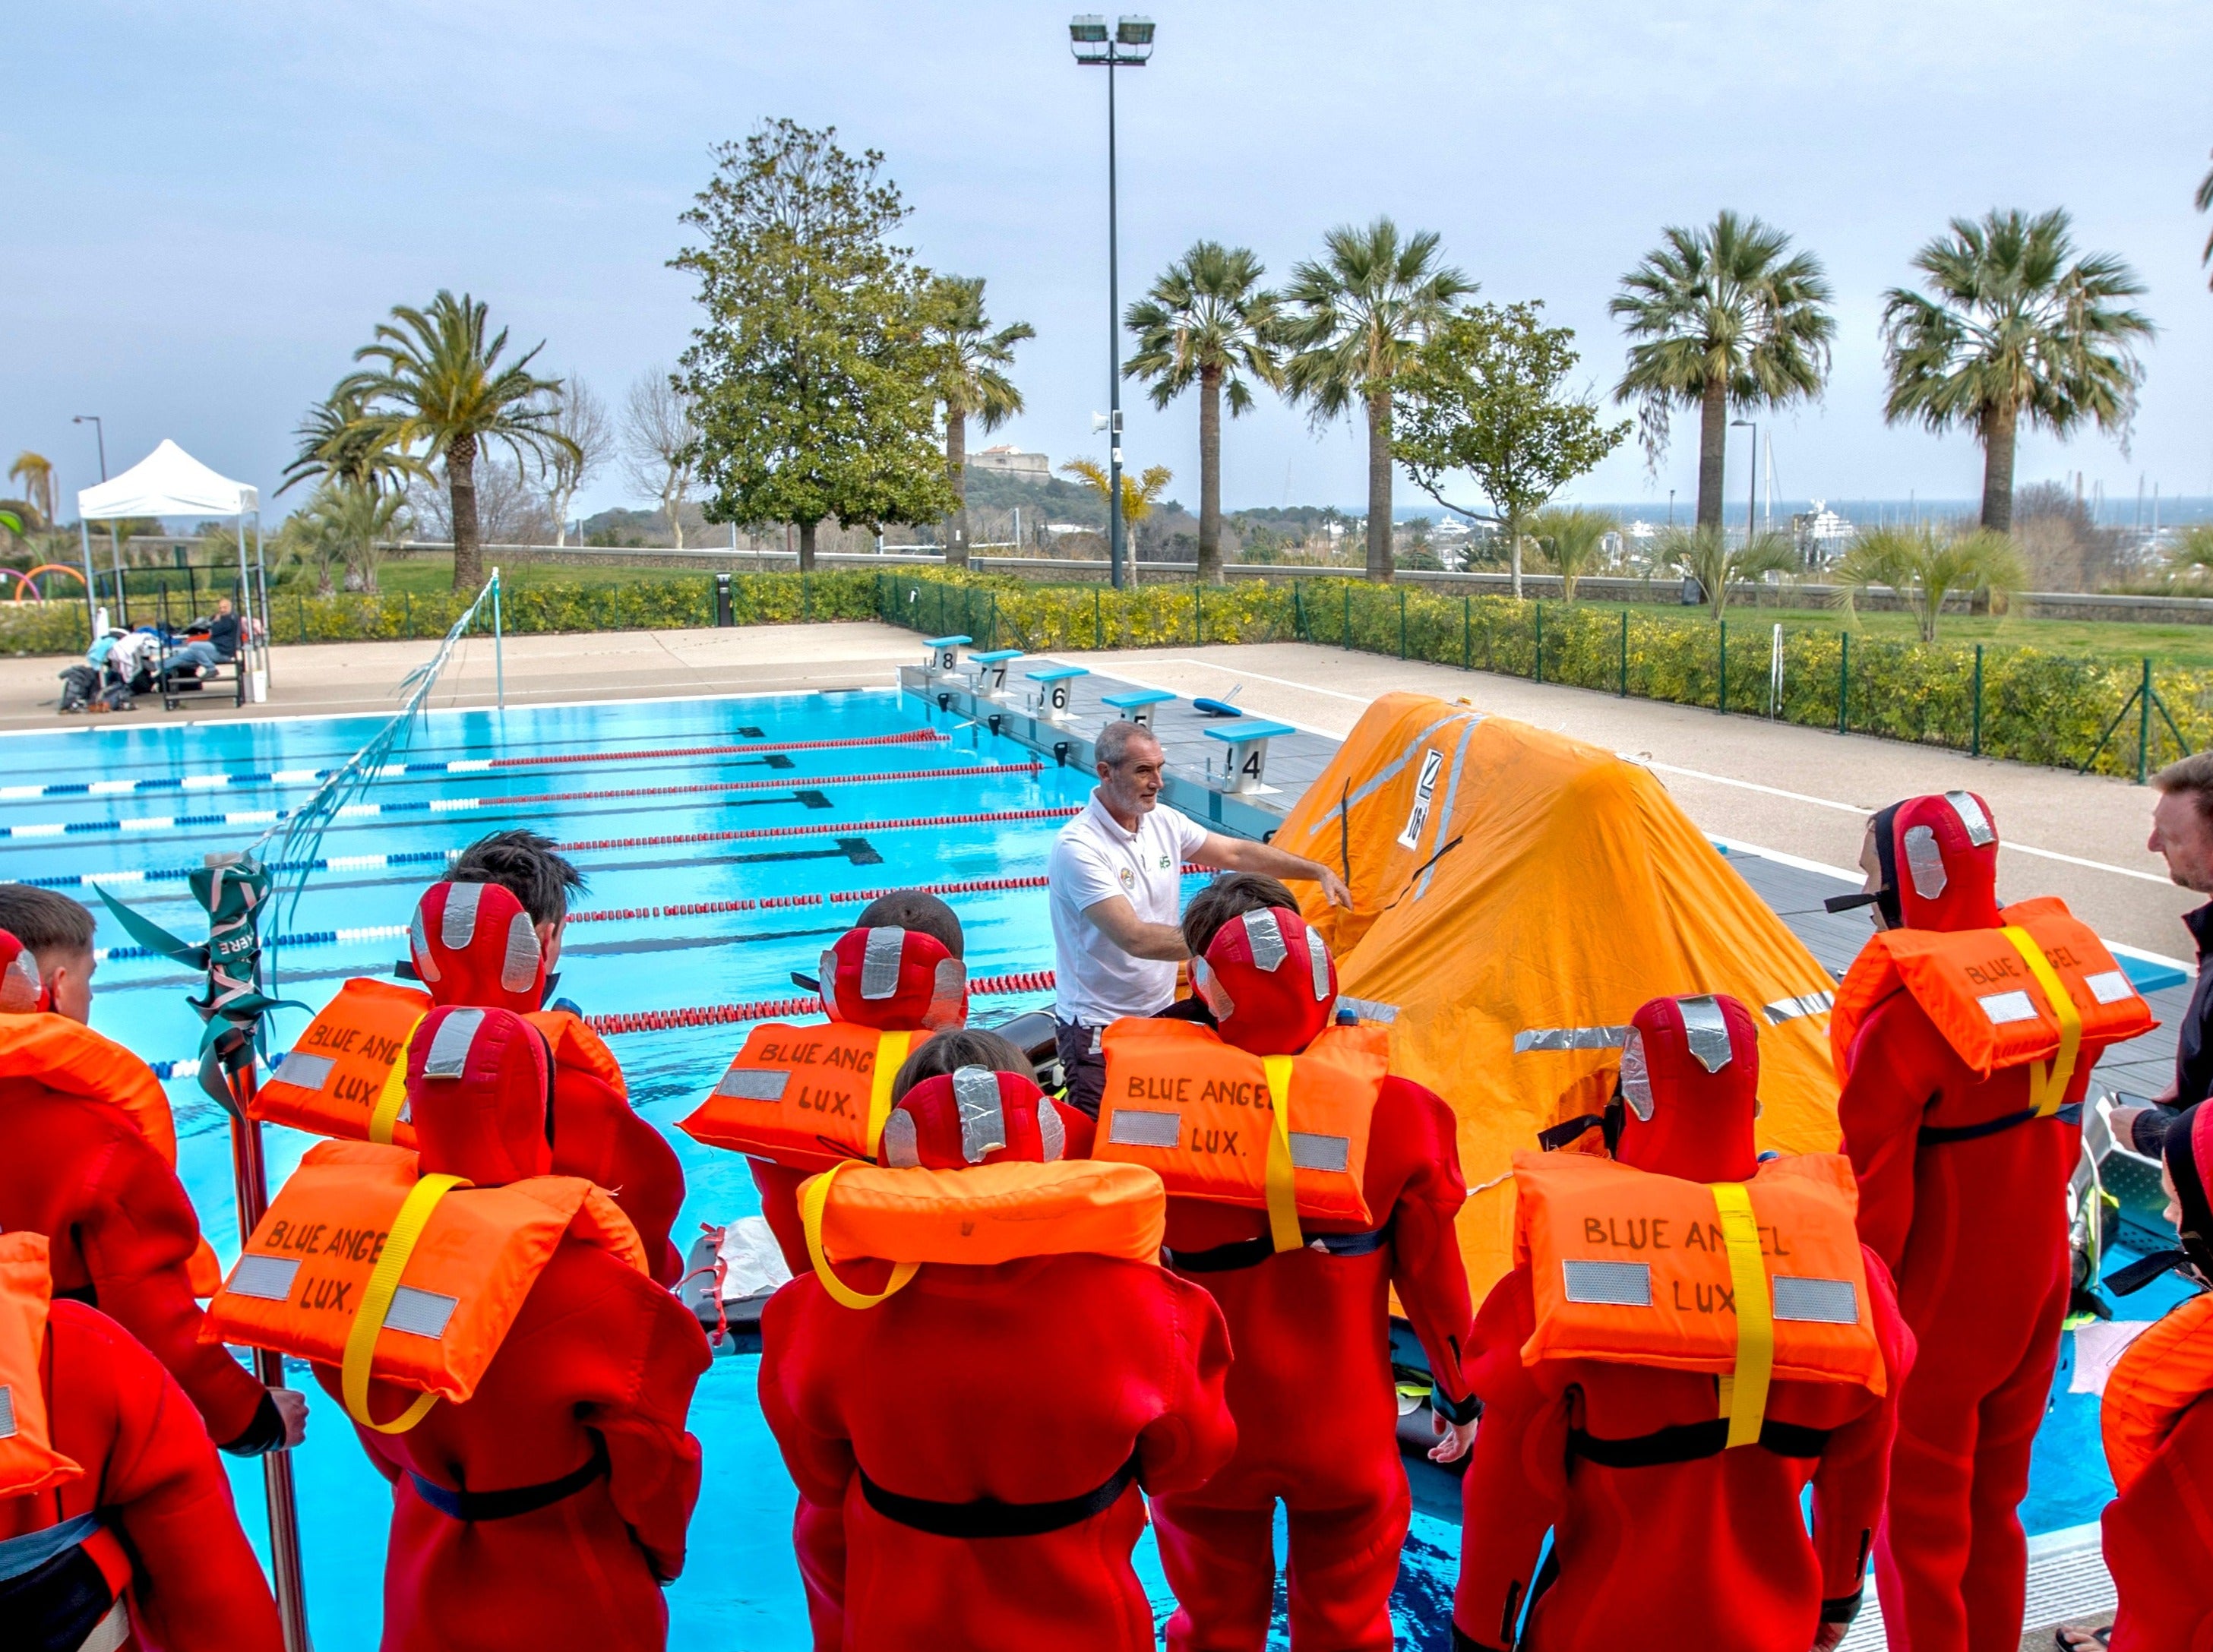 Ged giving instruction to Seascope France students at the swimming pool in Antibes